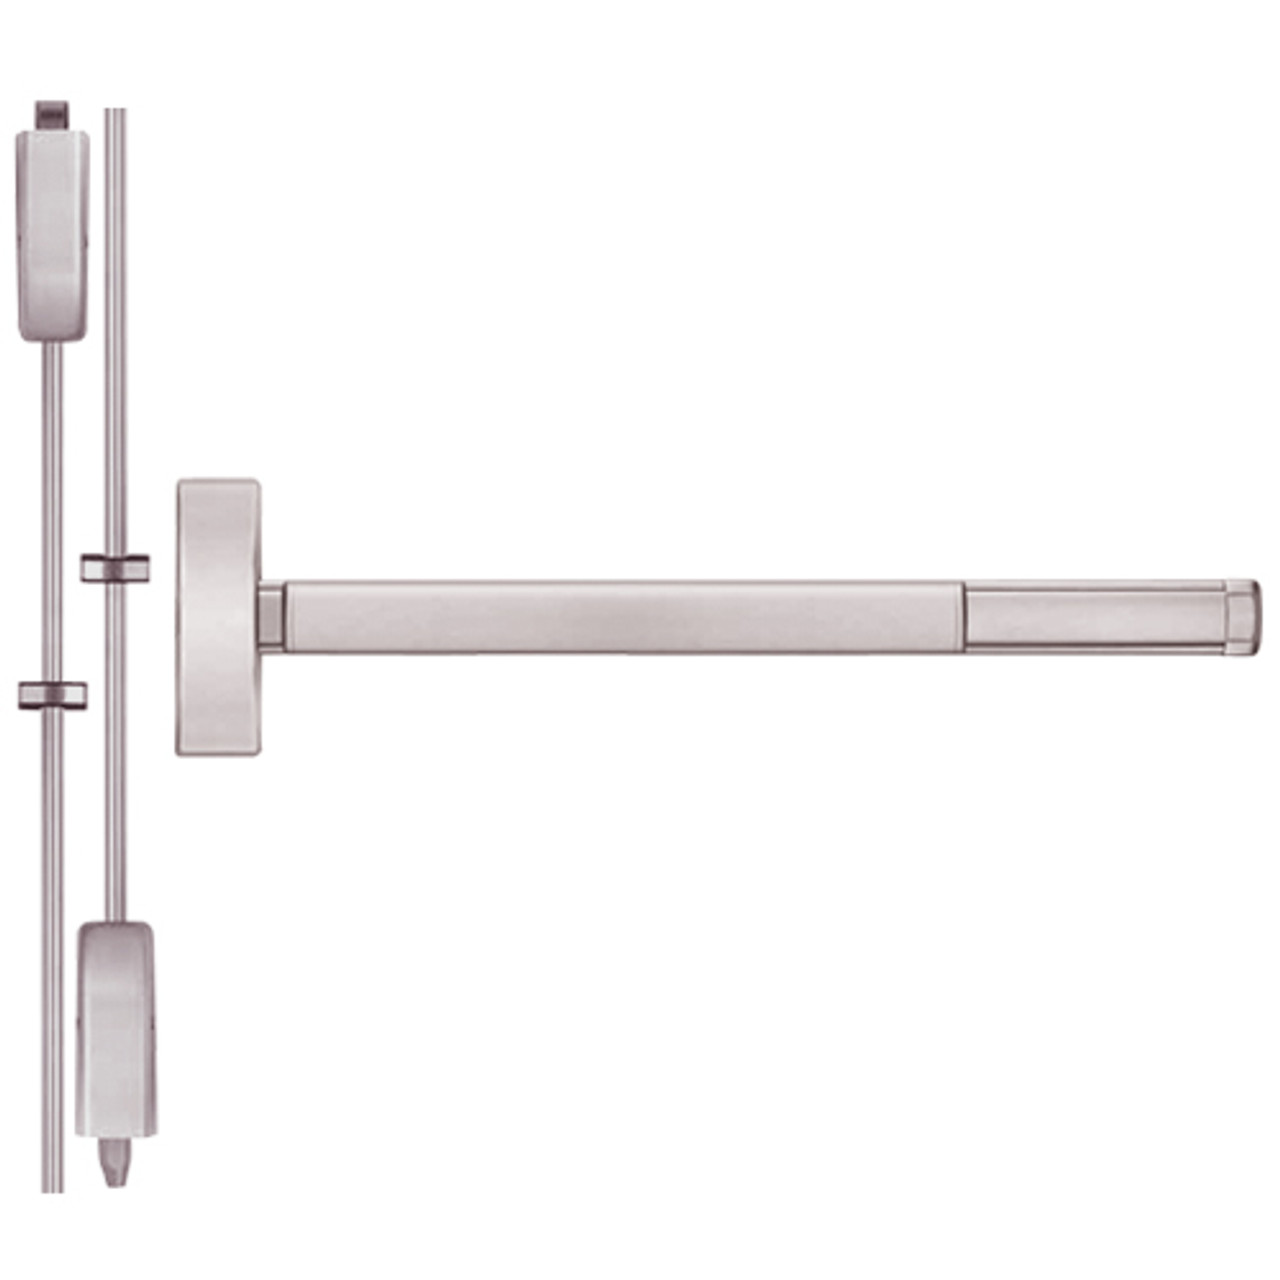 DE2203LBR-628-48 PHI 2200 Series Non Fire Rated Apex Surface Vertical Rod Device with Delayed Egress Prepped for Key Retracts Latchbolt in Satin Aluminum Finish